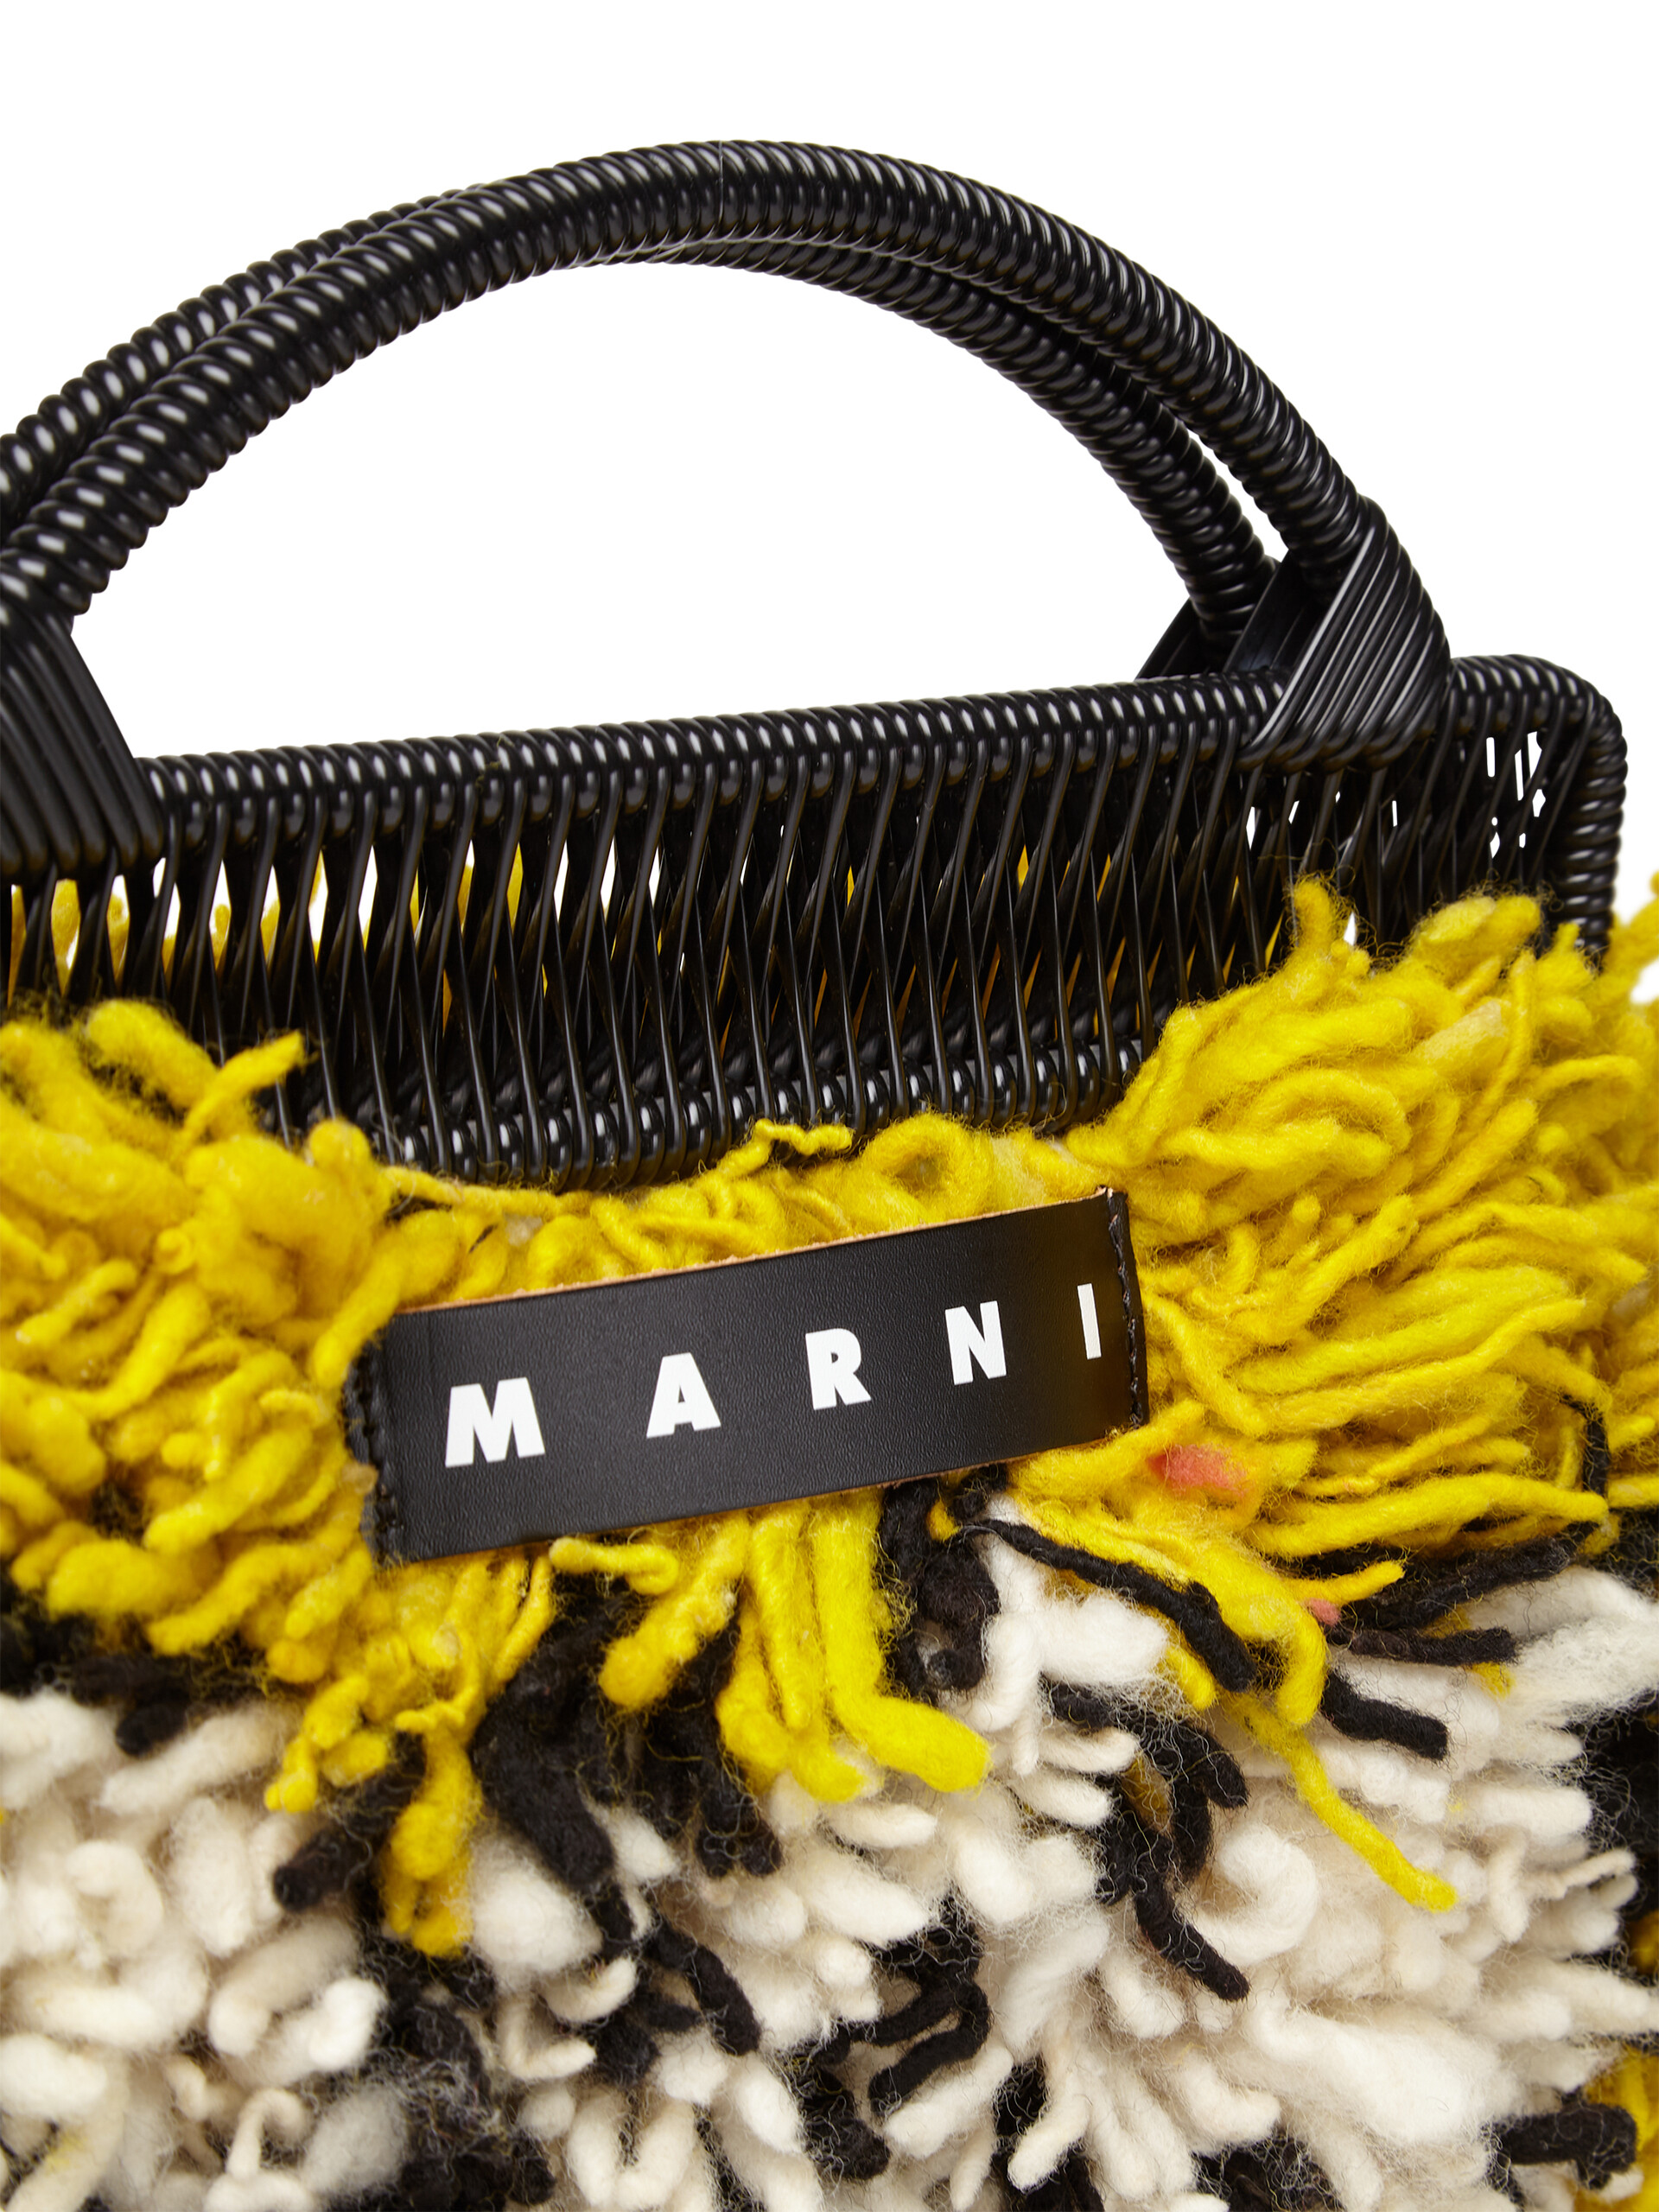 MARNI MARKET multicoloured frame bag in yellow brown and white long wool - Furniture - Image 4